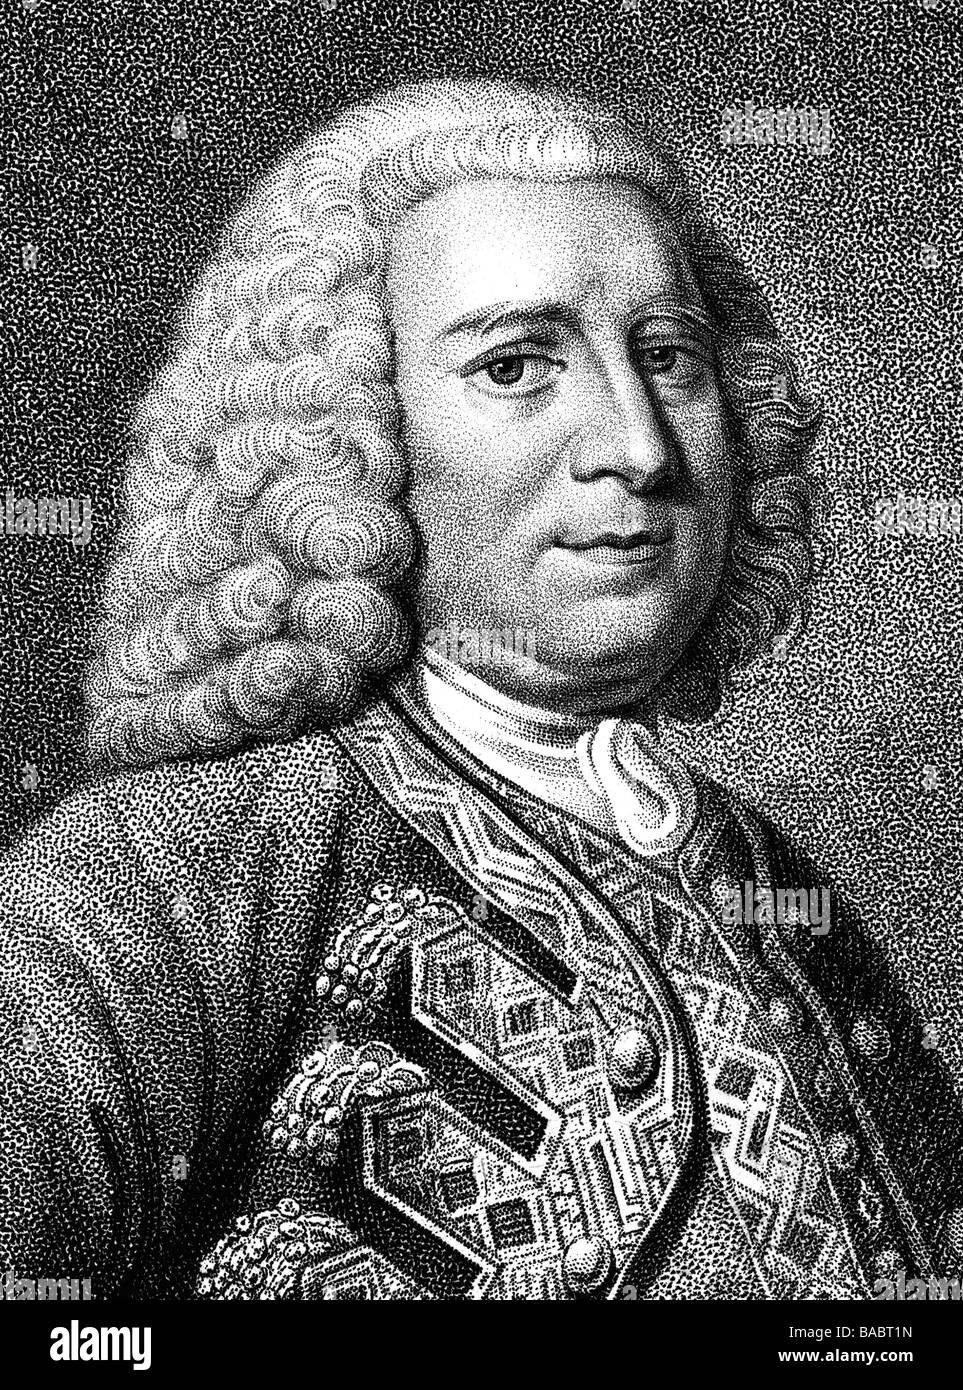 Anson, George, 23.4.1697 - 6.6.1762, British admiral, Frist Lord of the Admirality 1751 - 1756 and 1757 - 1762, portrait,  portrait, steel engraving by Bollinger, 19th century, , Artist's Copyright has not to be cleared Stock Photo